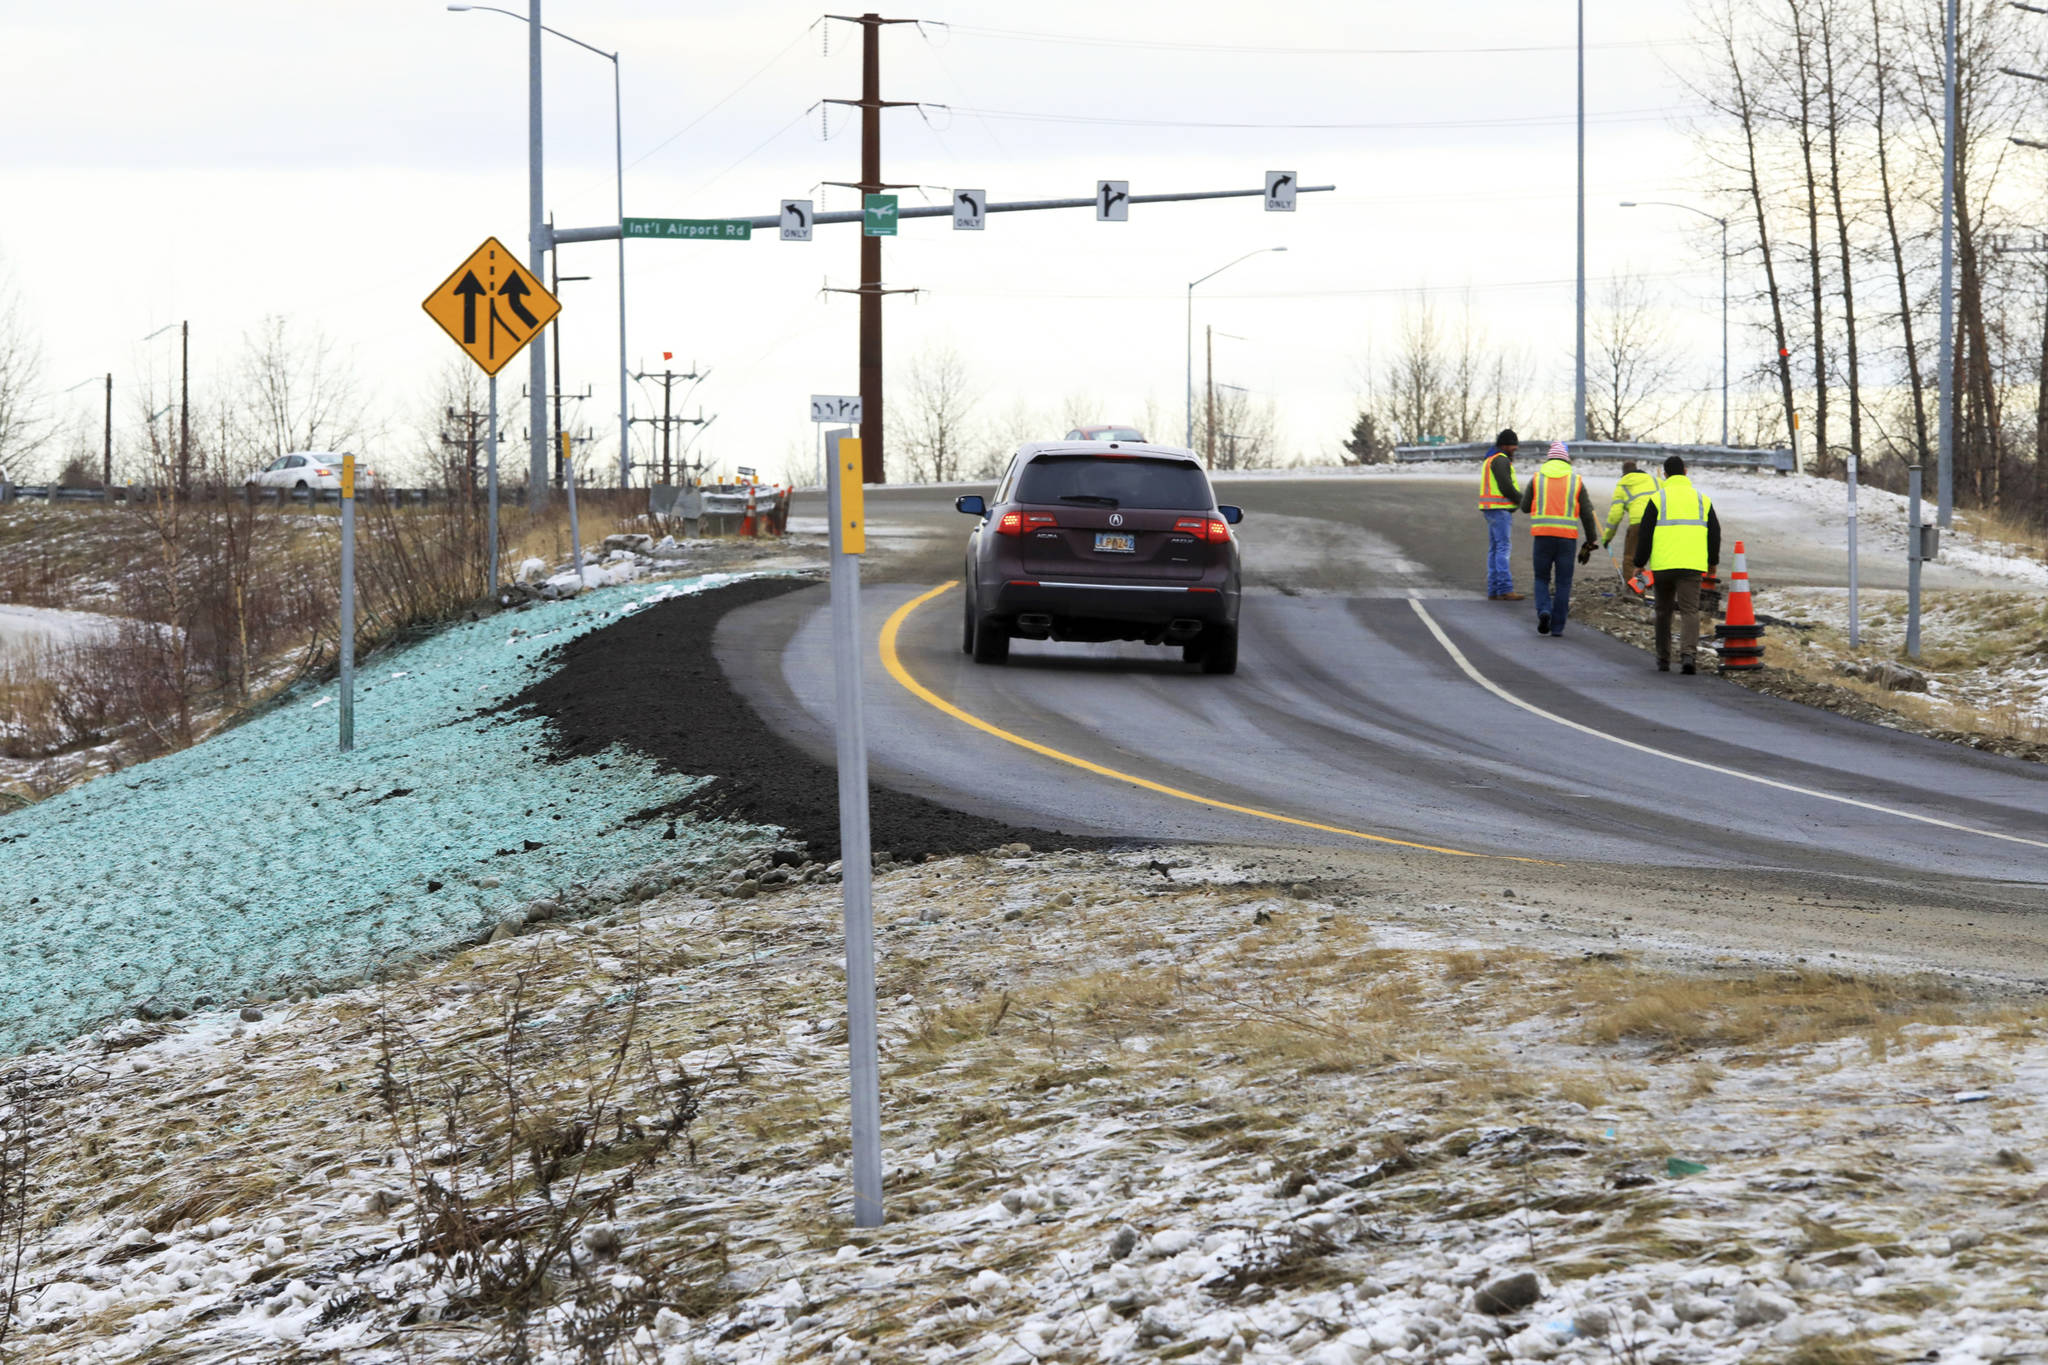 A car ascends a newly repaired off-ramp of Minnesota Drive on Wednesday, Dec. 5, 2018, in Anchorage, Alaska. A massive 7.0 earthquake and its aftershocks rocked buildings and buckled roads Nov. 30, including the road that’s a route to Ted Stevens Anchorage International Airport. Alaska transportation officials made rebuilding the ramp a priority. It reopened Tuesday, Dec. 4, and a crew completed shoulder work Wednesday. (AP Photo/Dan Joling)